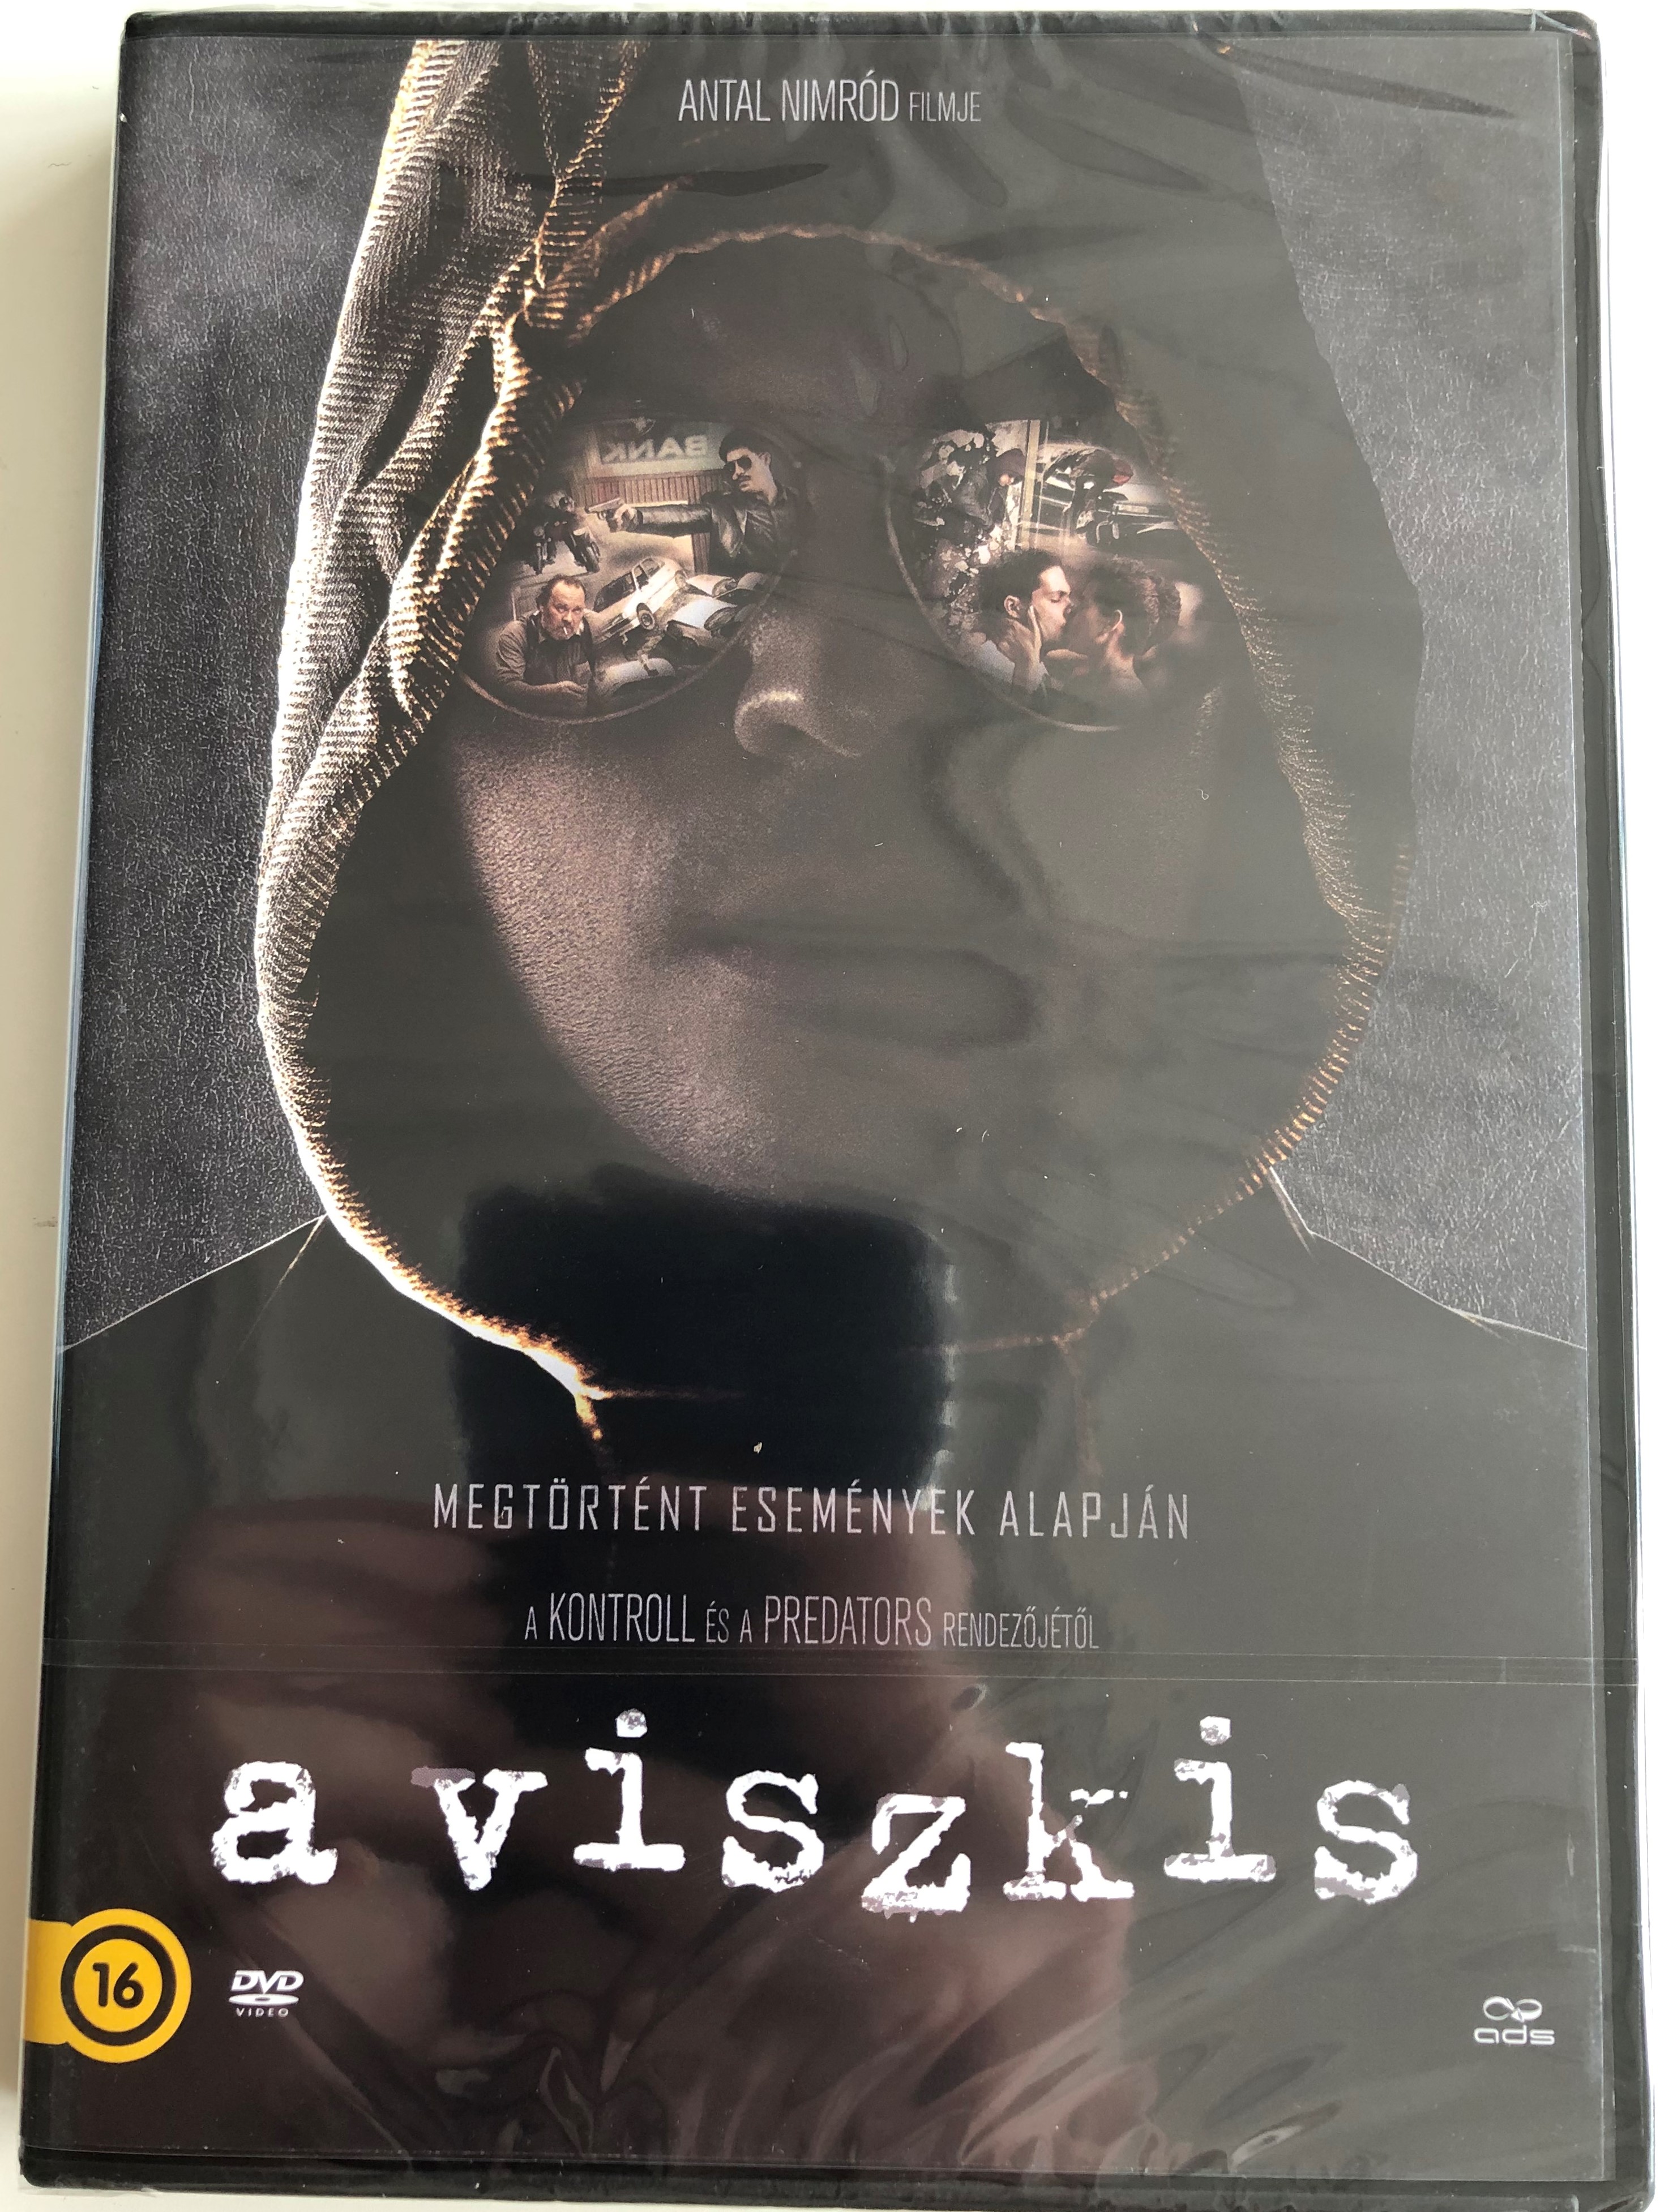 a-viszkis-dvd-2017-the-whisky-robber-directed-by-antal-nimr-d-1.jpg